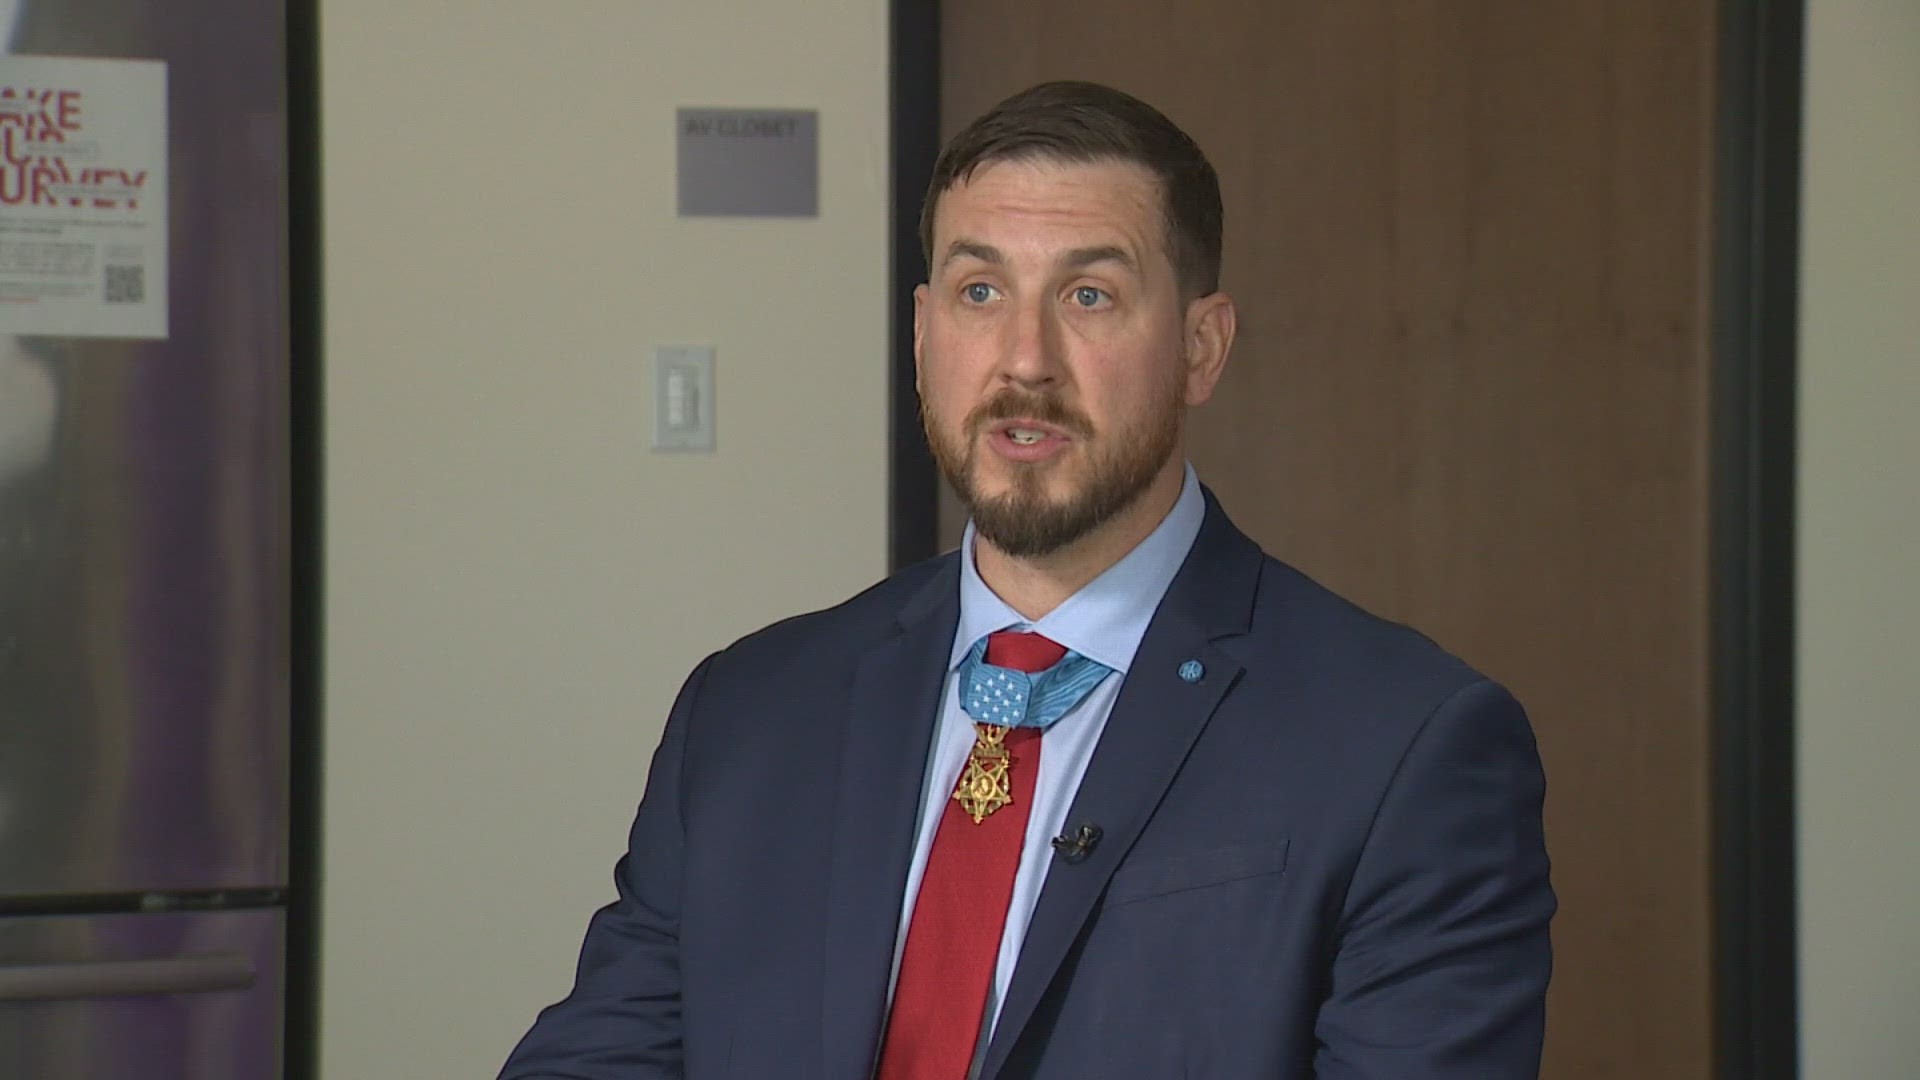 Retired Staff Sgt. Ryan Pitts was the lone survivor of an ambush in Afghanistan more than 15 years ago. He still struggles with physical and emotional scars.